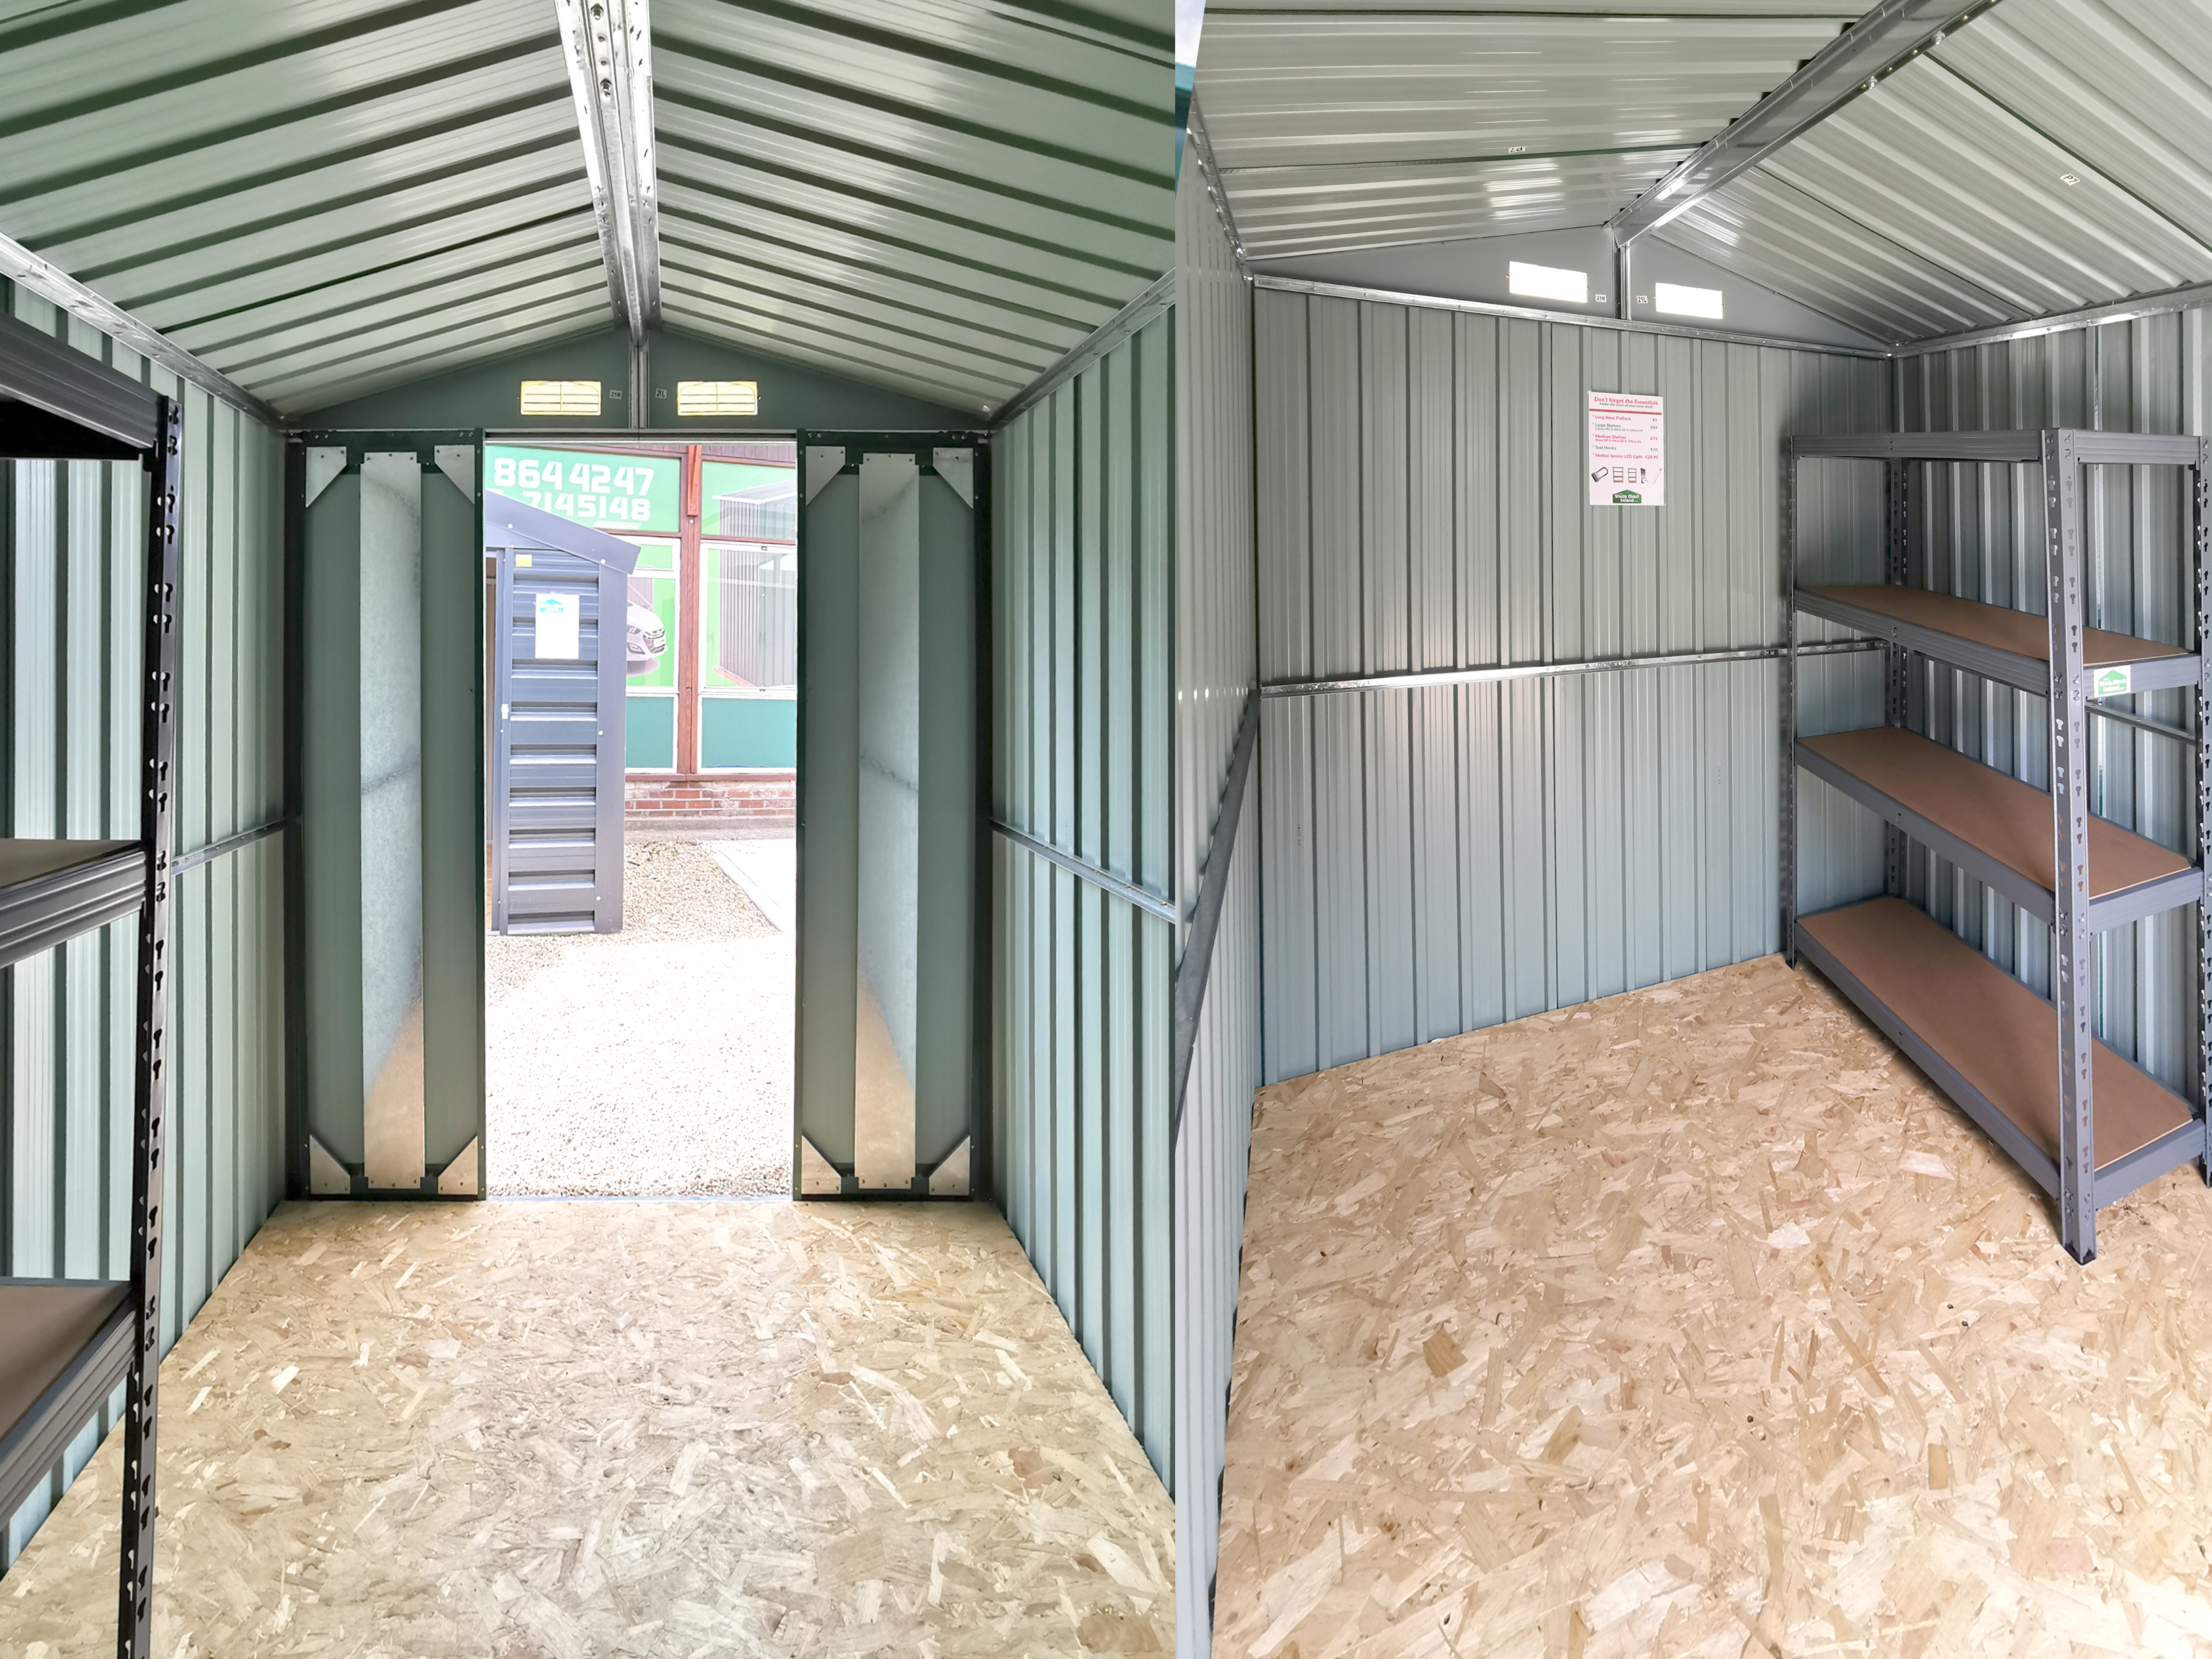 Two images side by side, both showing the inside of the shed. The first is from a mid-height level, from the back of the shed looking outwards. The second is from the inside corner looking towards the back